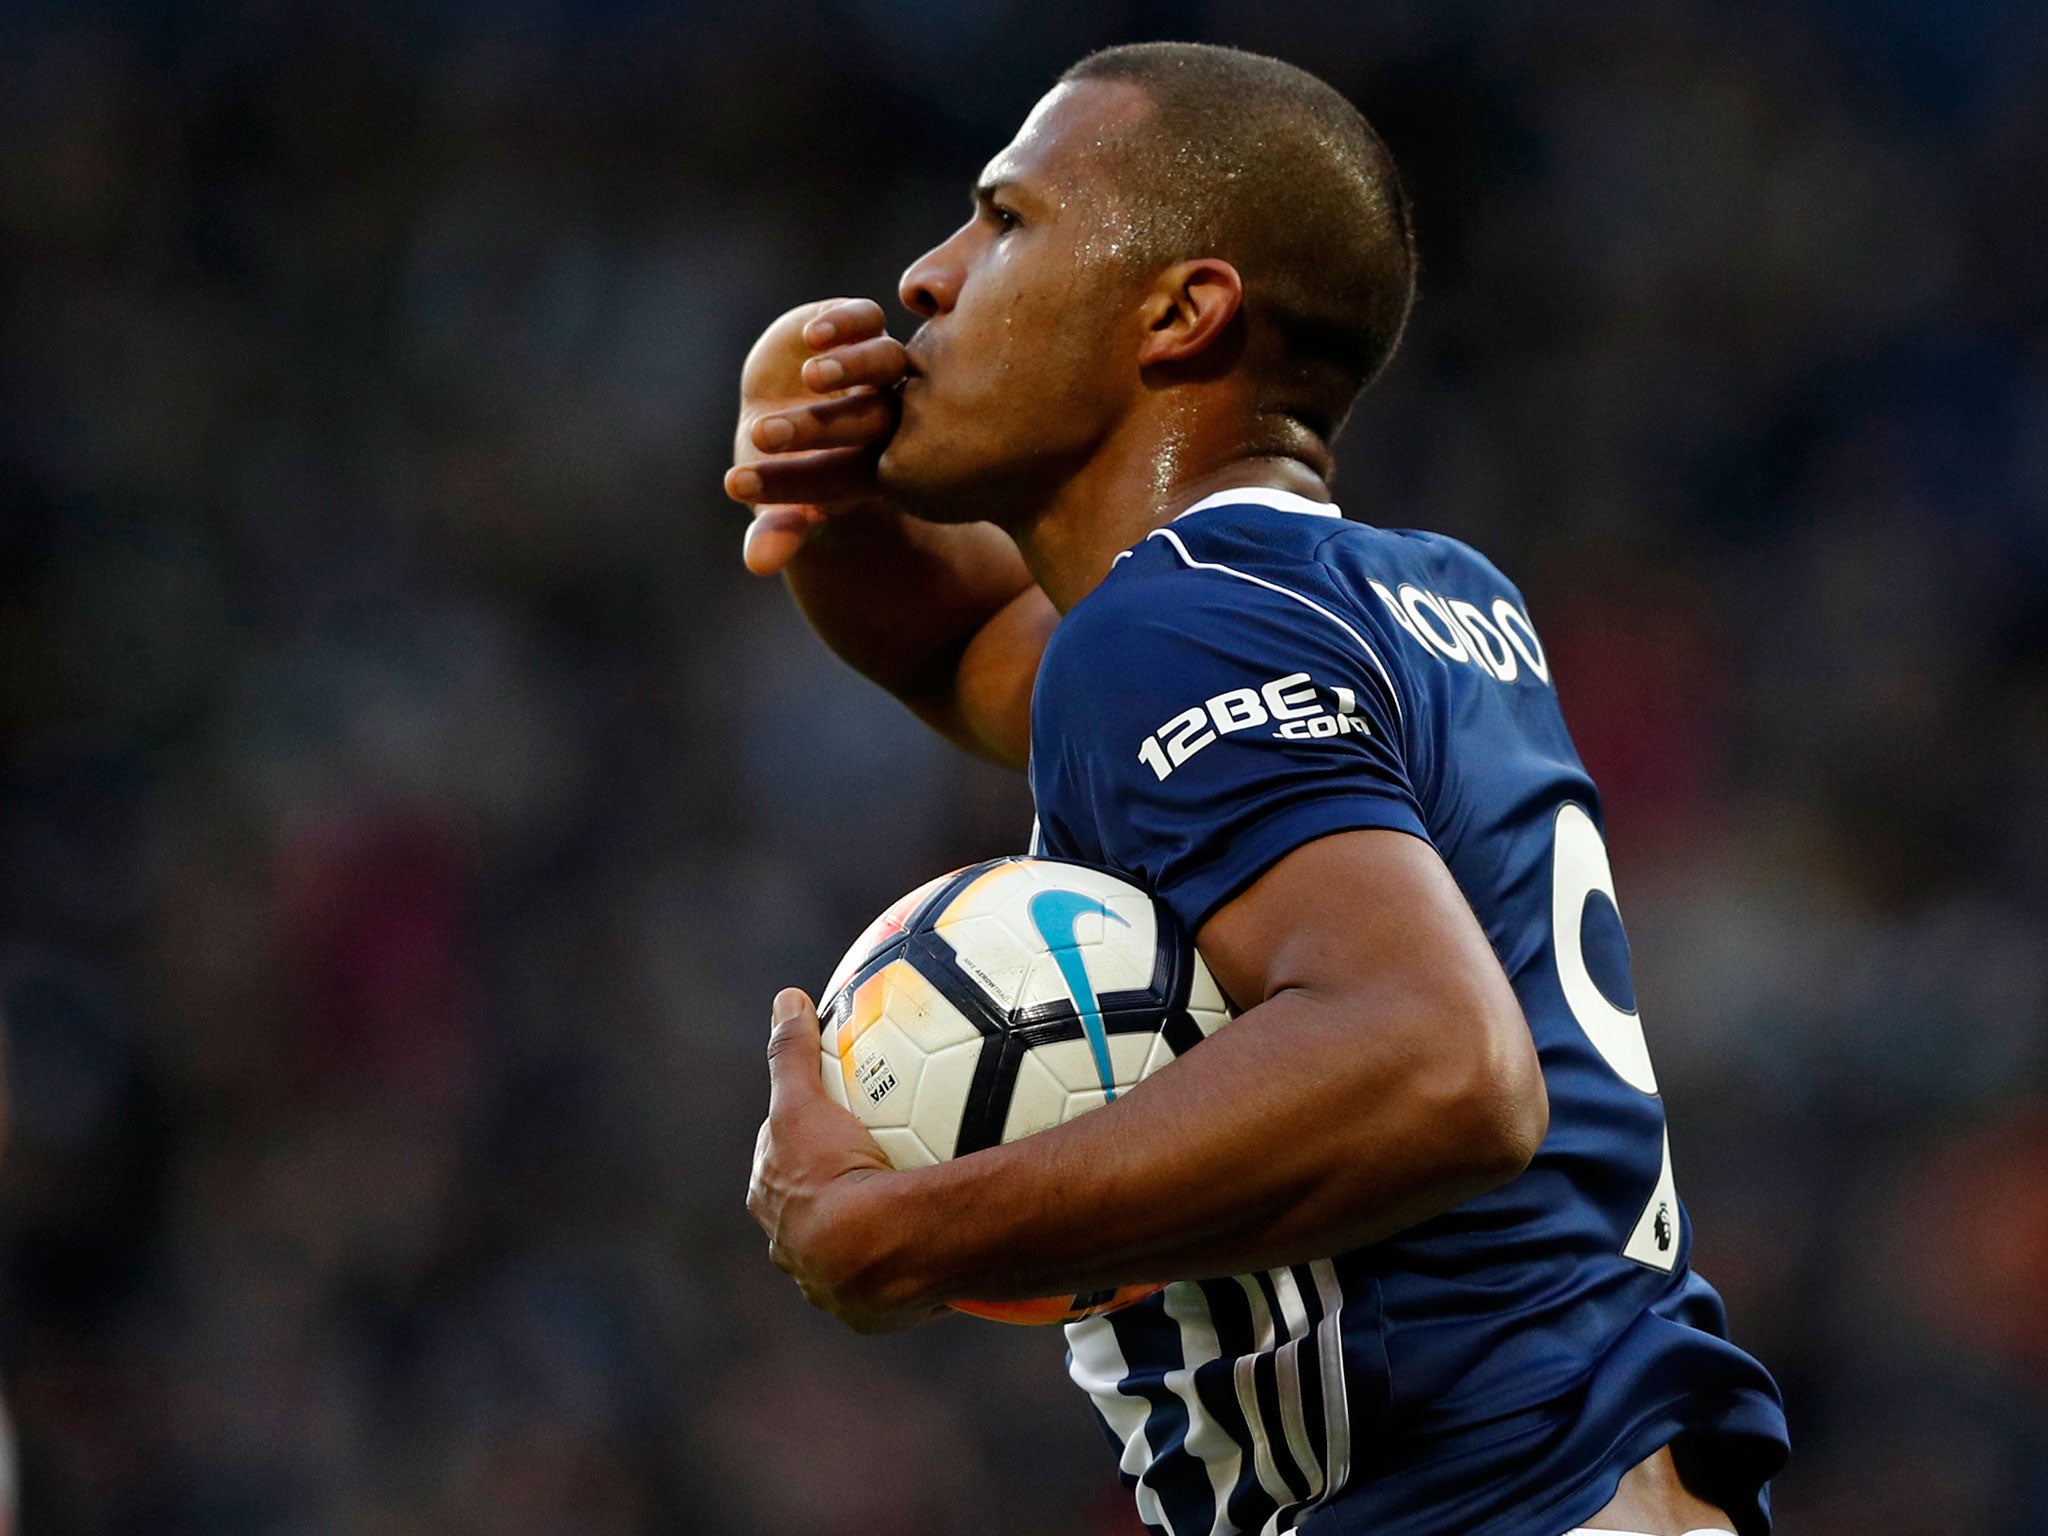 Salomon Rondon playing for West Brom